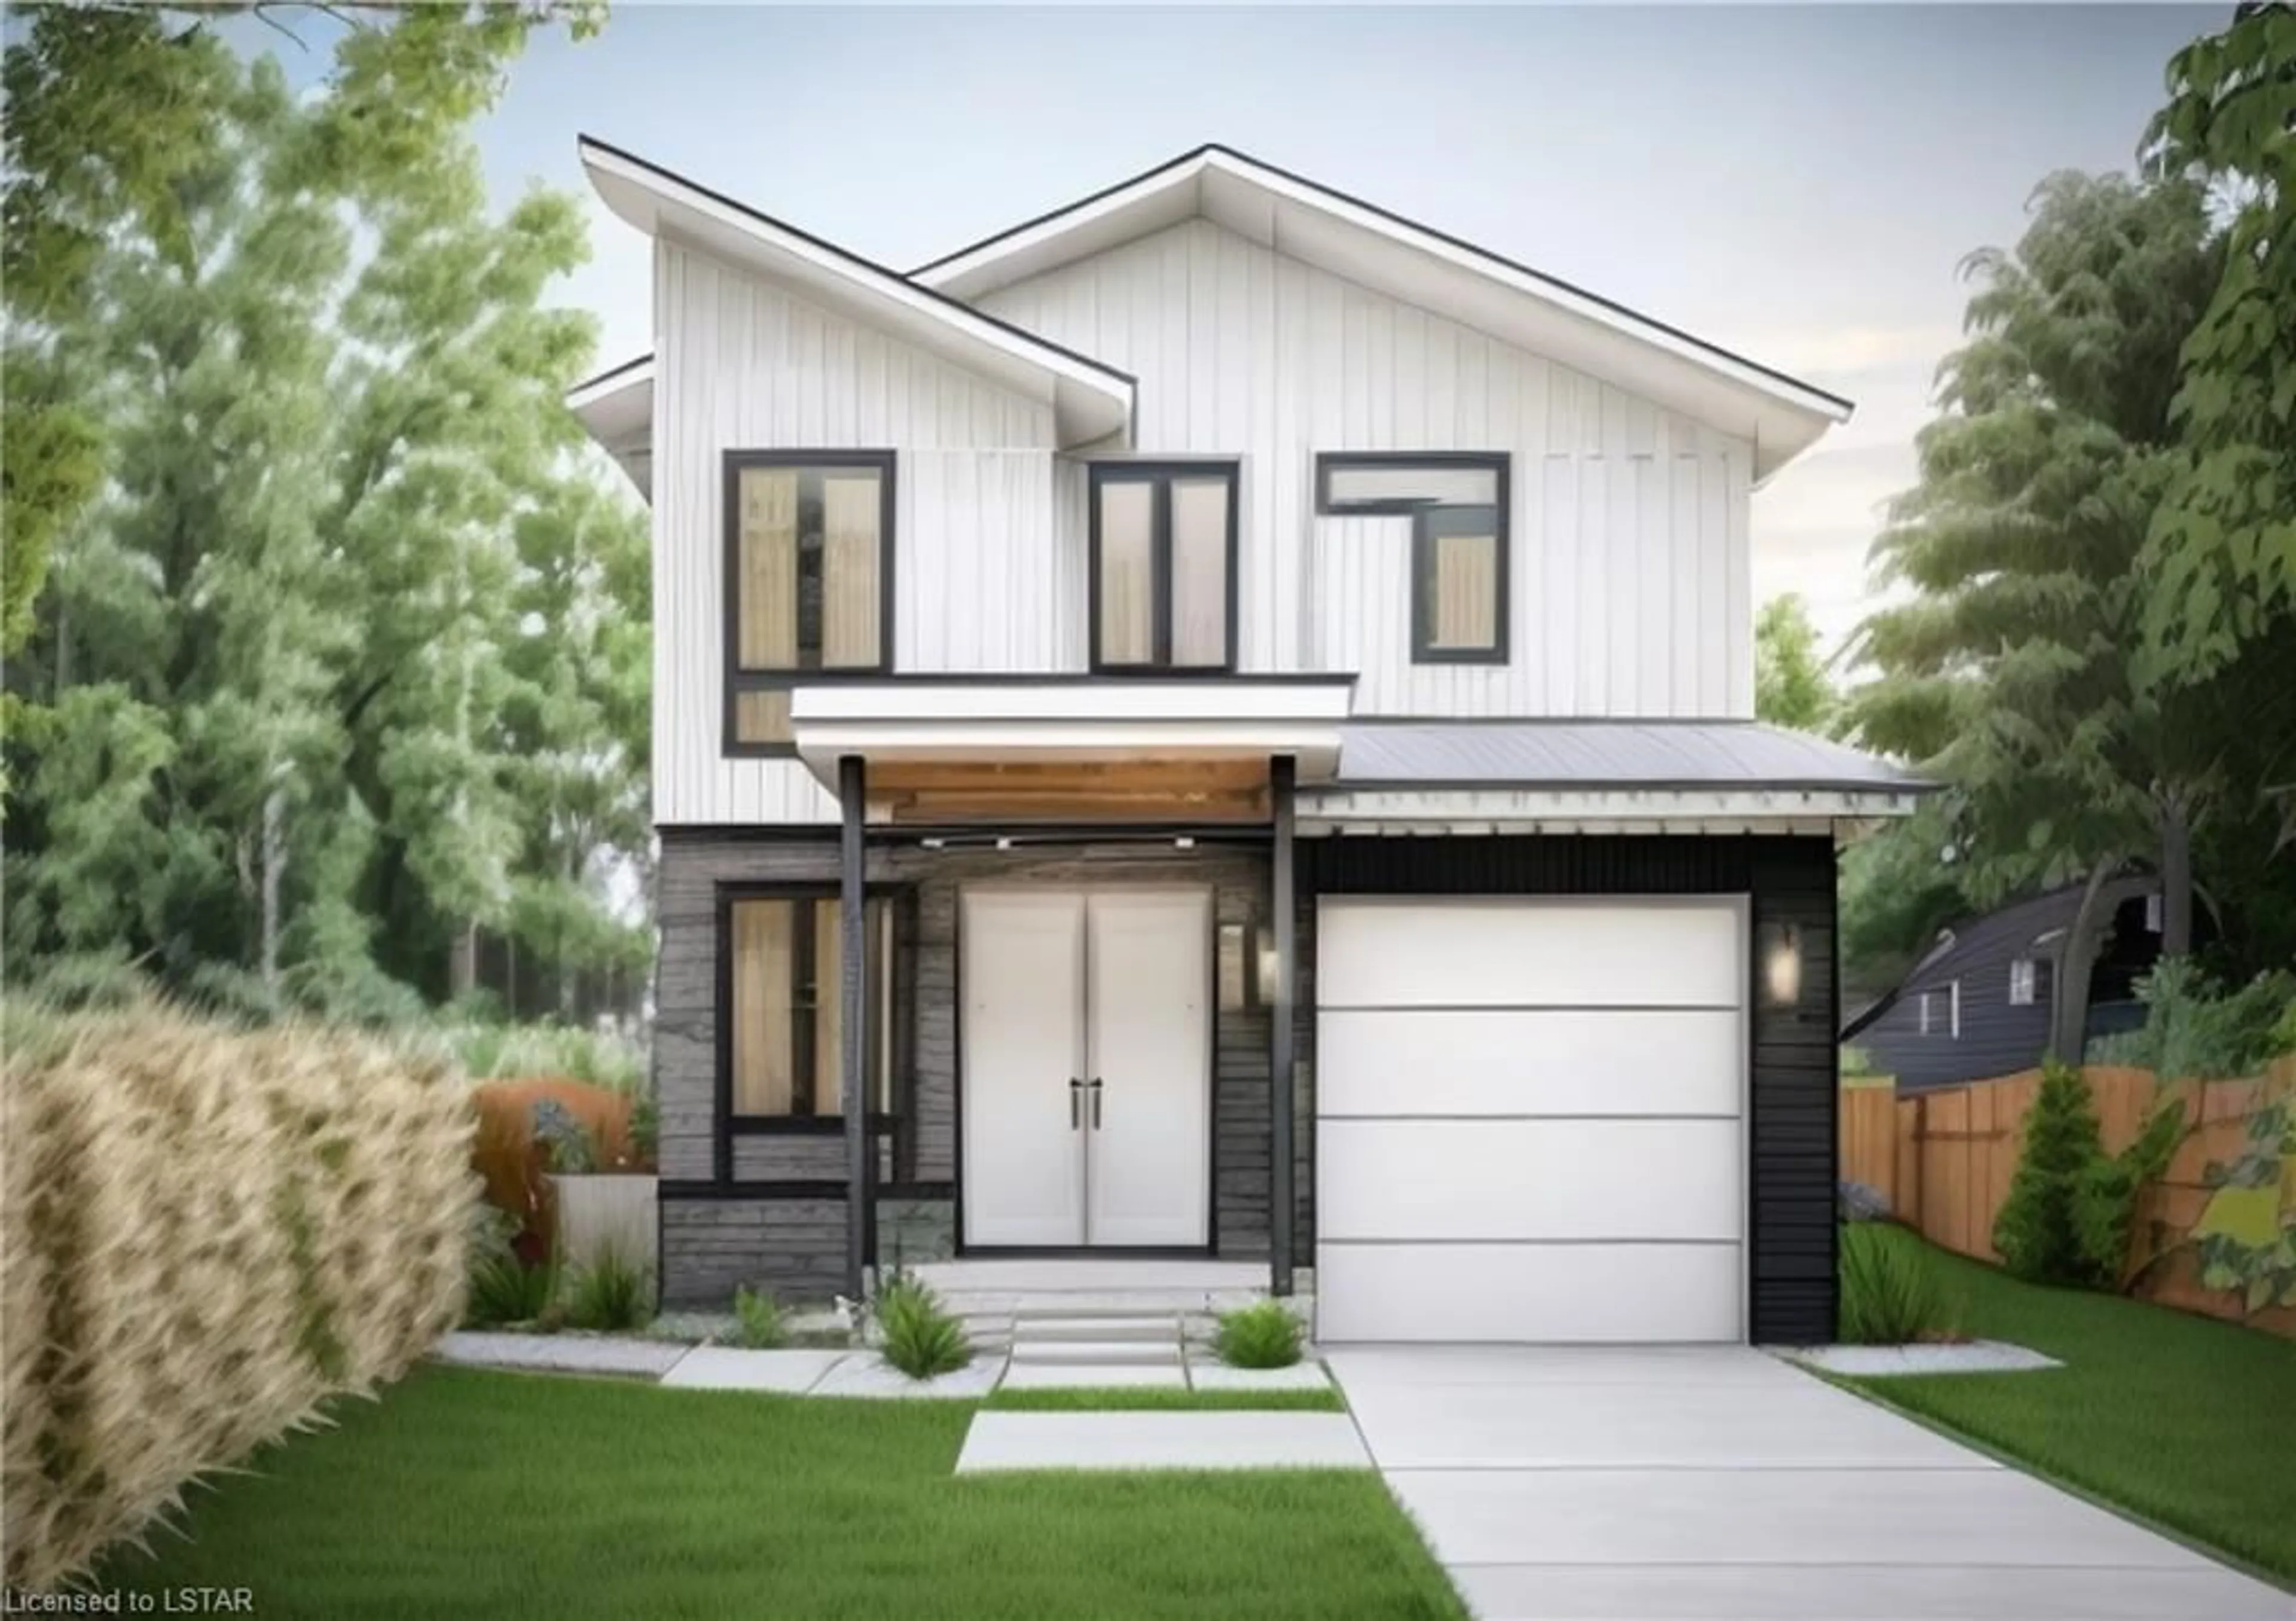 Frontside or backside of a home for LOT 210 Hobbs Dr, London Ontario N6M 0M2